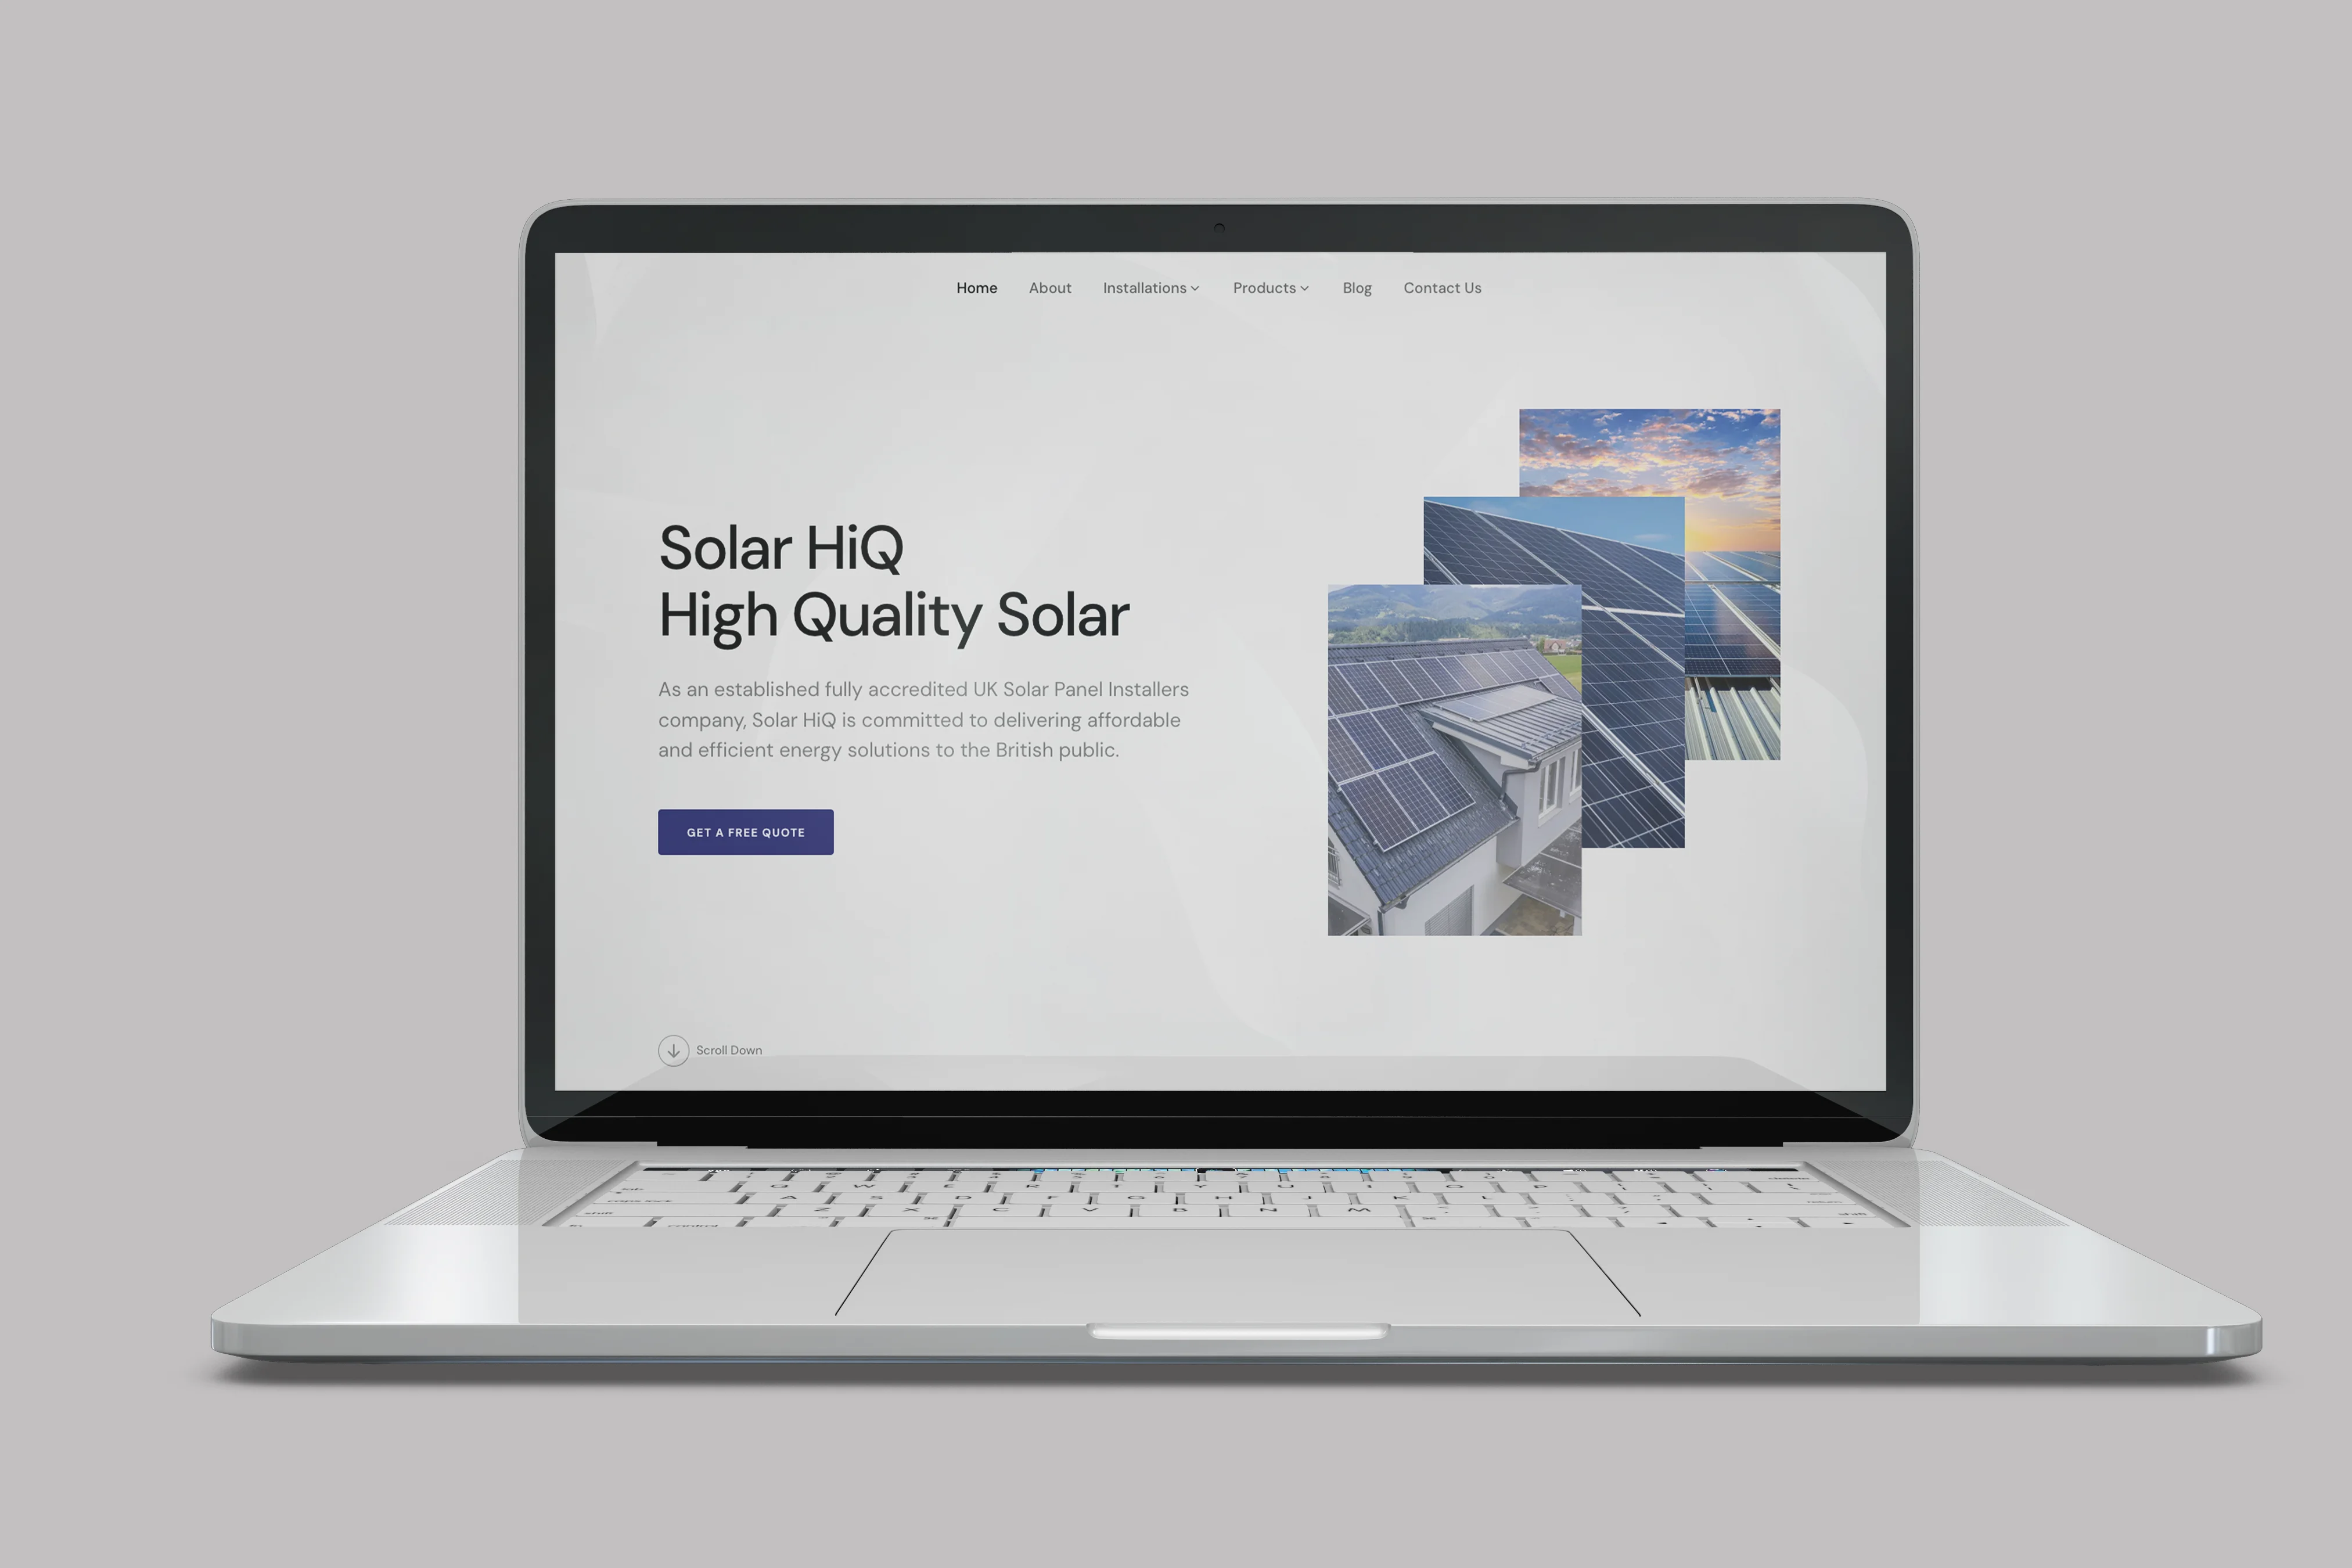 As an established fully accredited UK Solar Panel Installers company, Solar HiQ is committed to delivering affordable and efficient energy solutions to the British public.